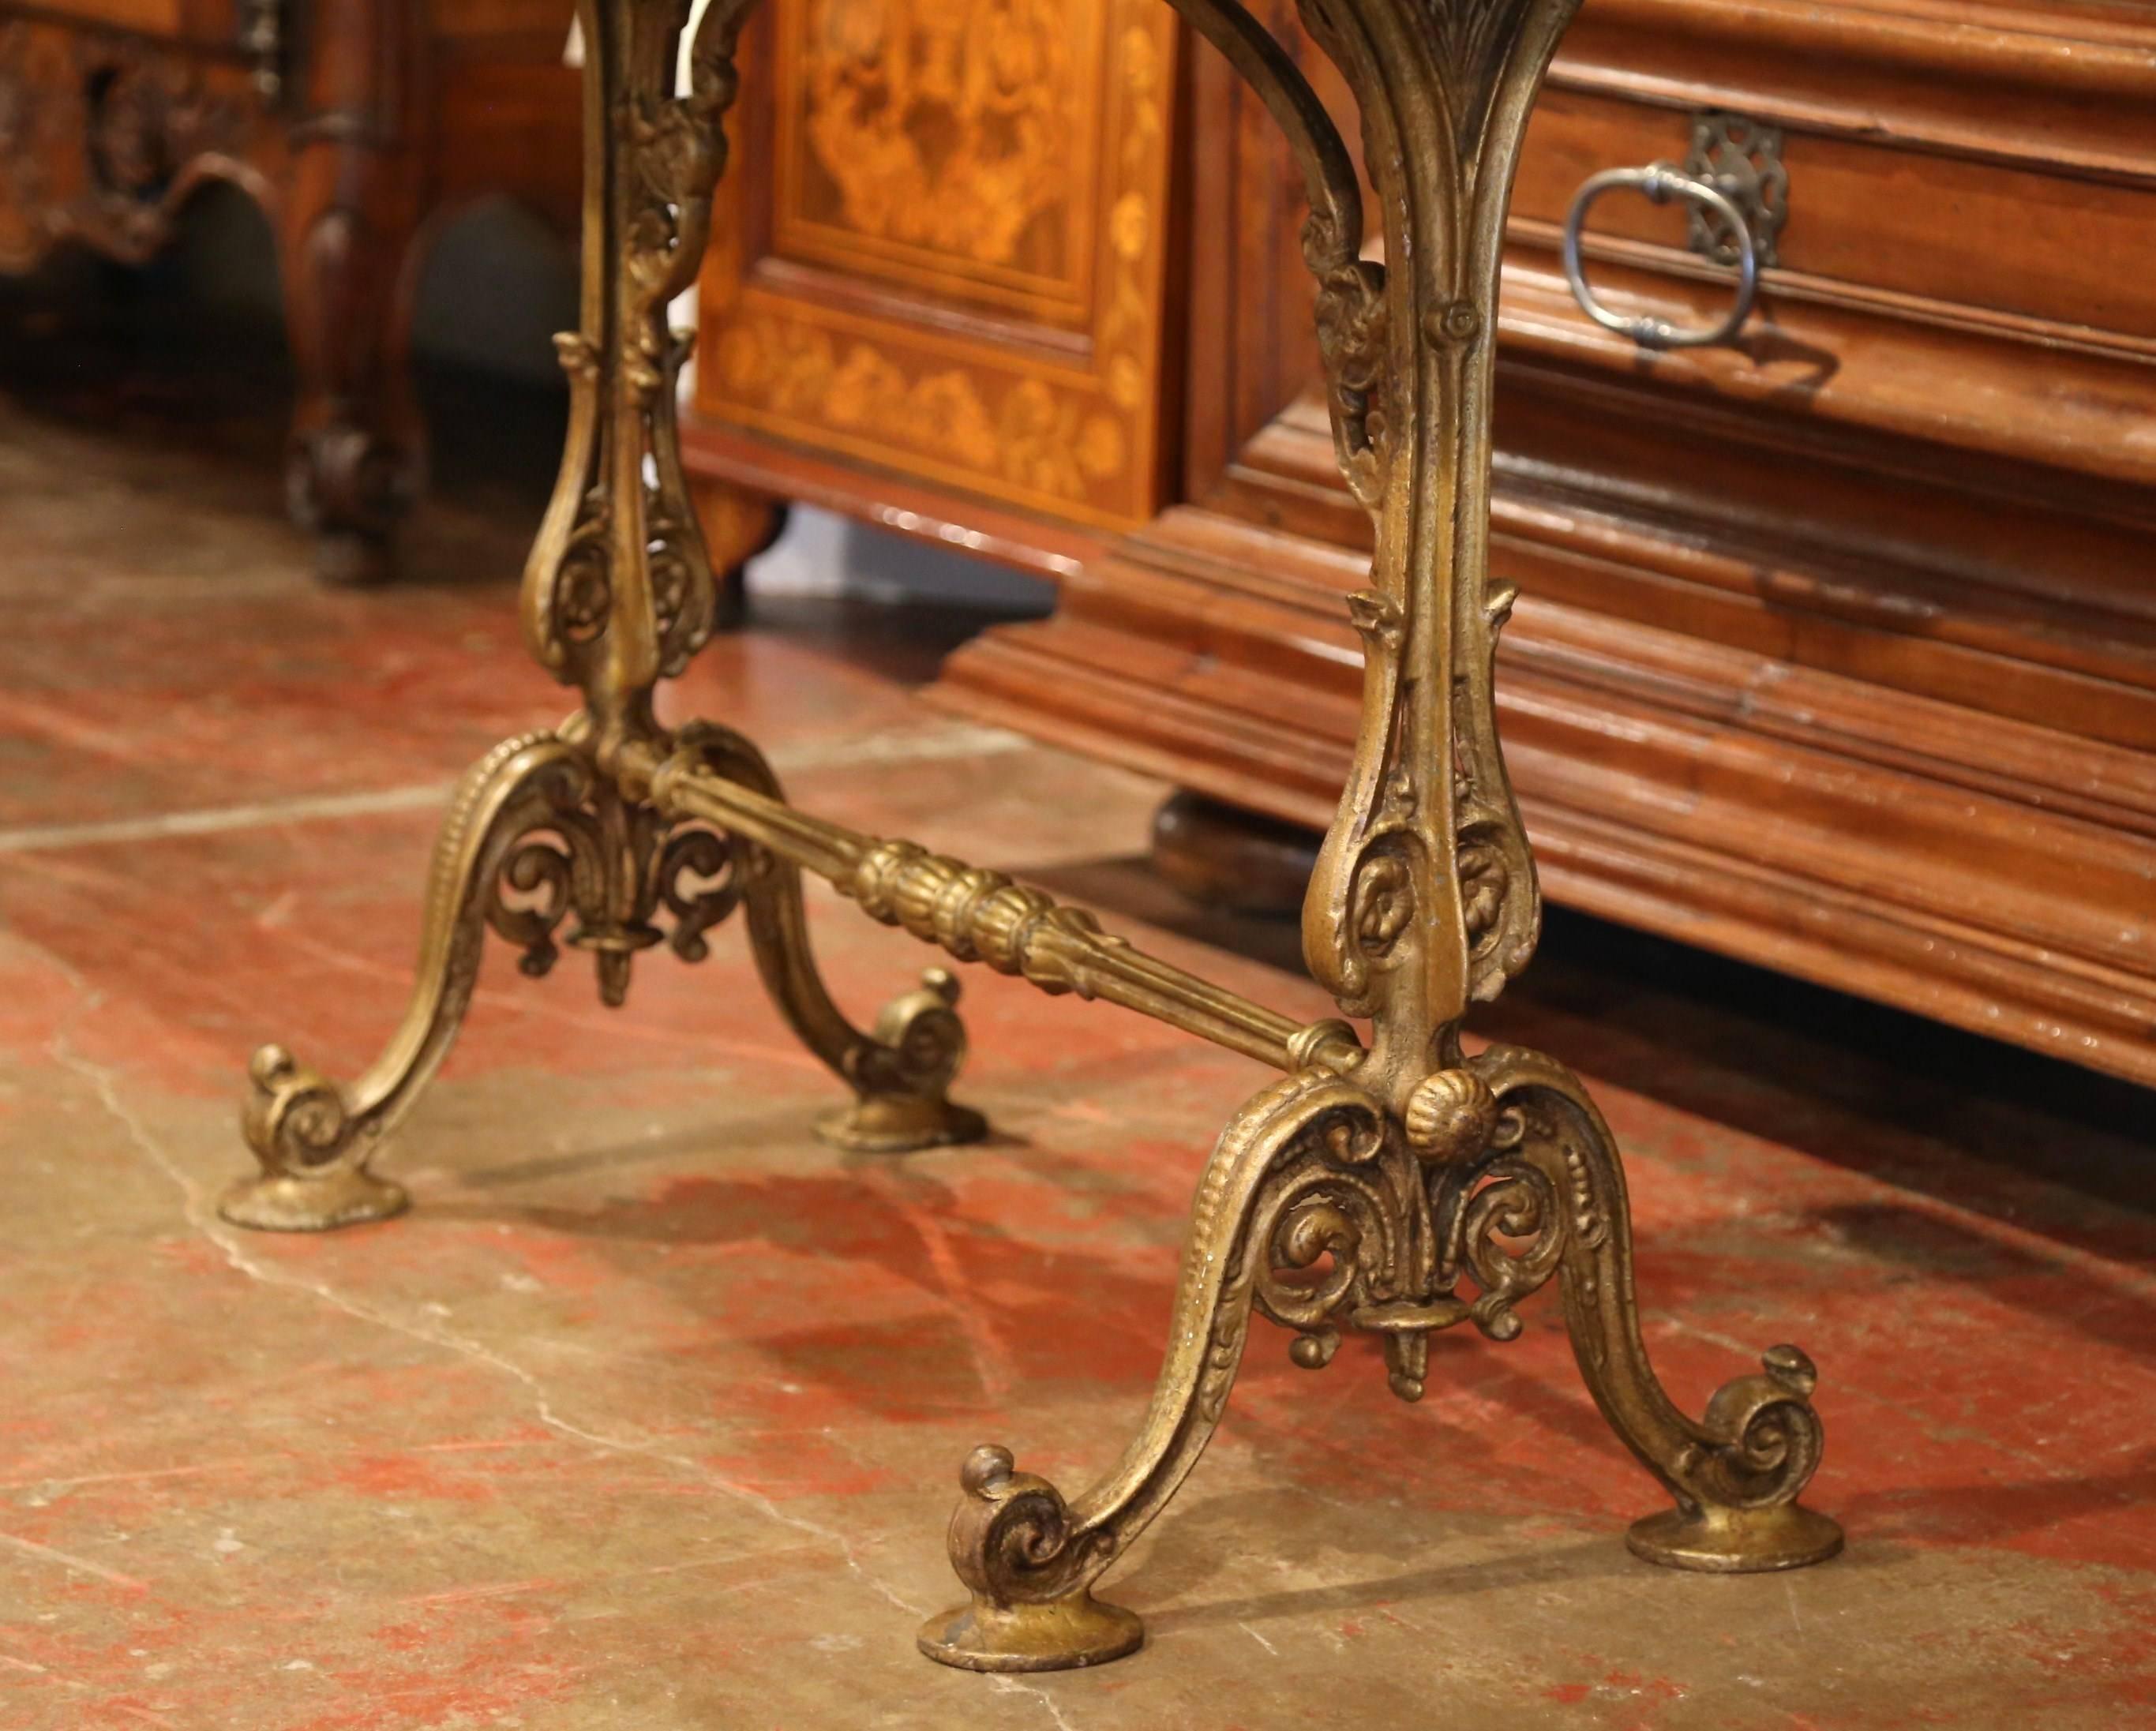 This elegant, antique bistrot table was forged in Paris, France, circa 1880. The versatile table could be placed outside or inside, and features two scrolled pedestals joined with a decorative stretcher and foliage. The piece has an aged white and